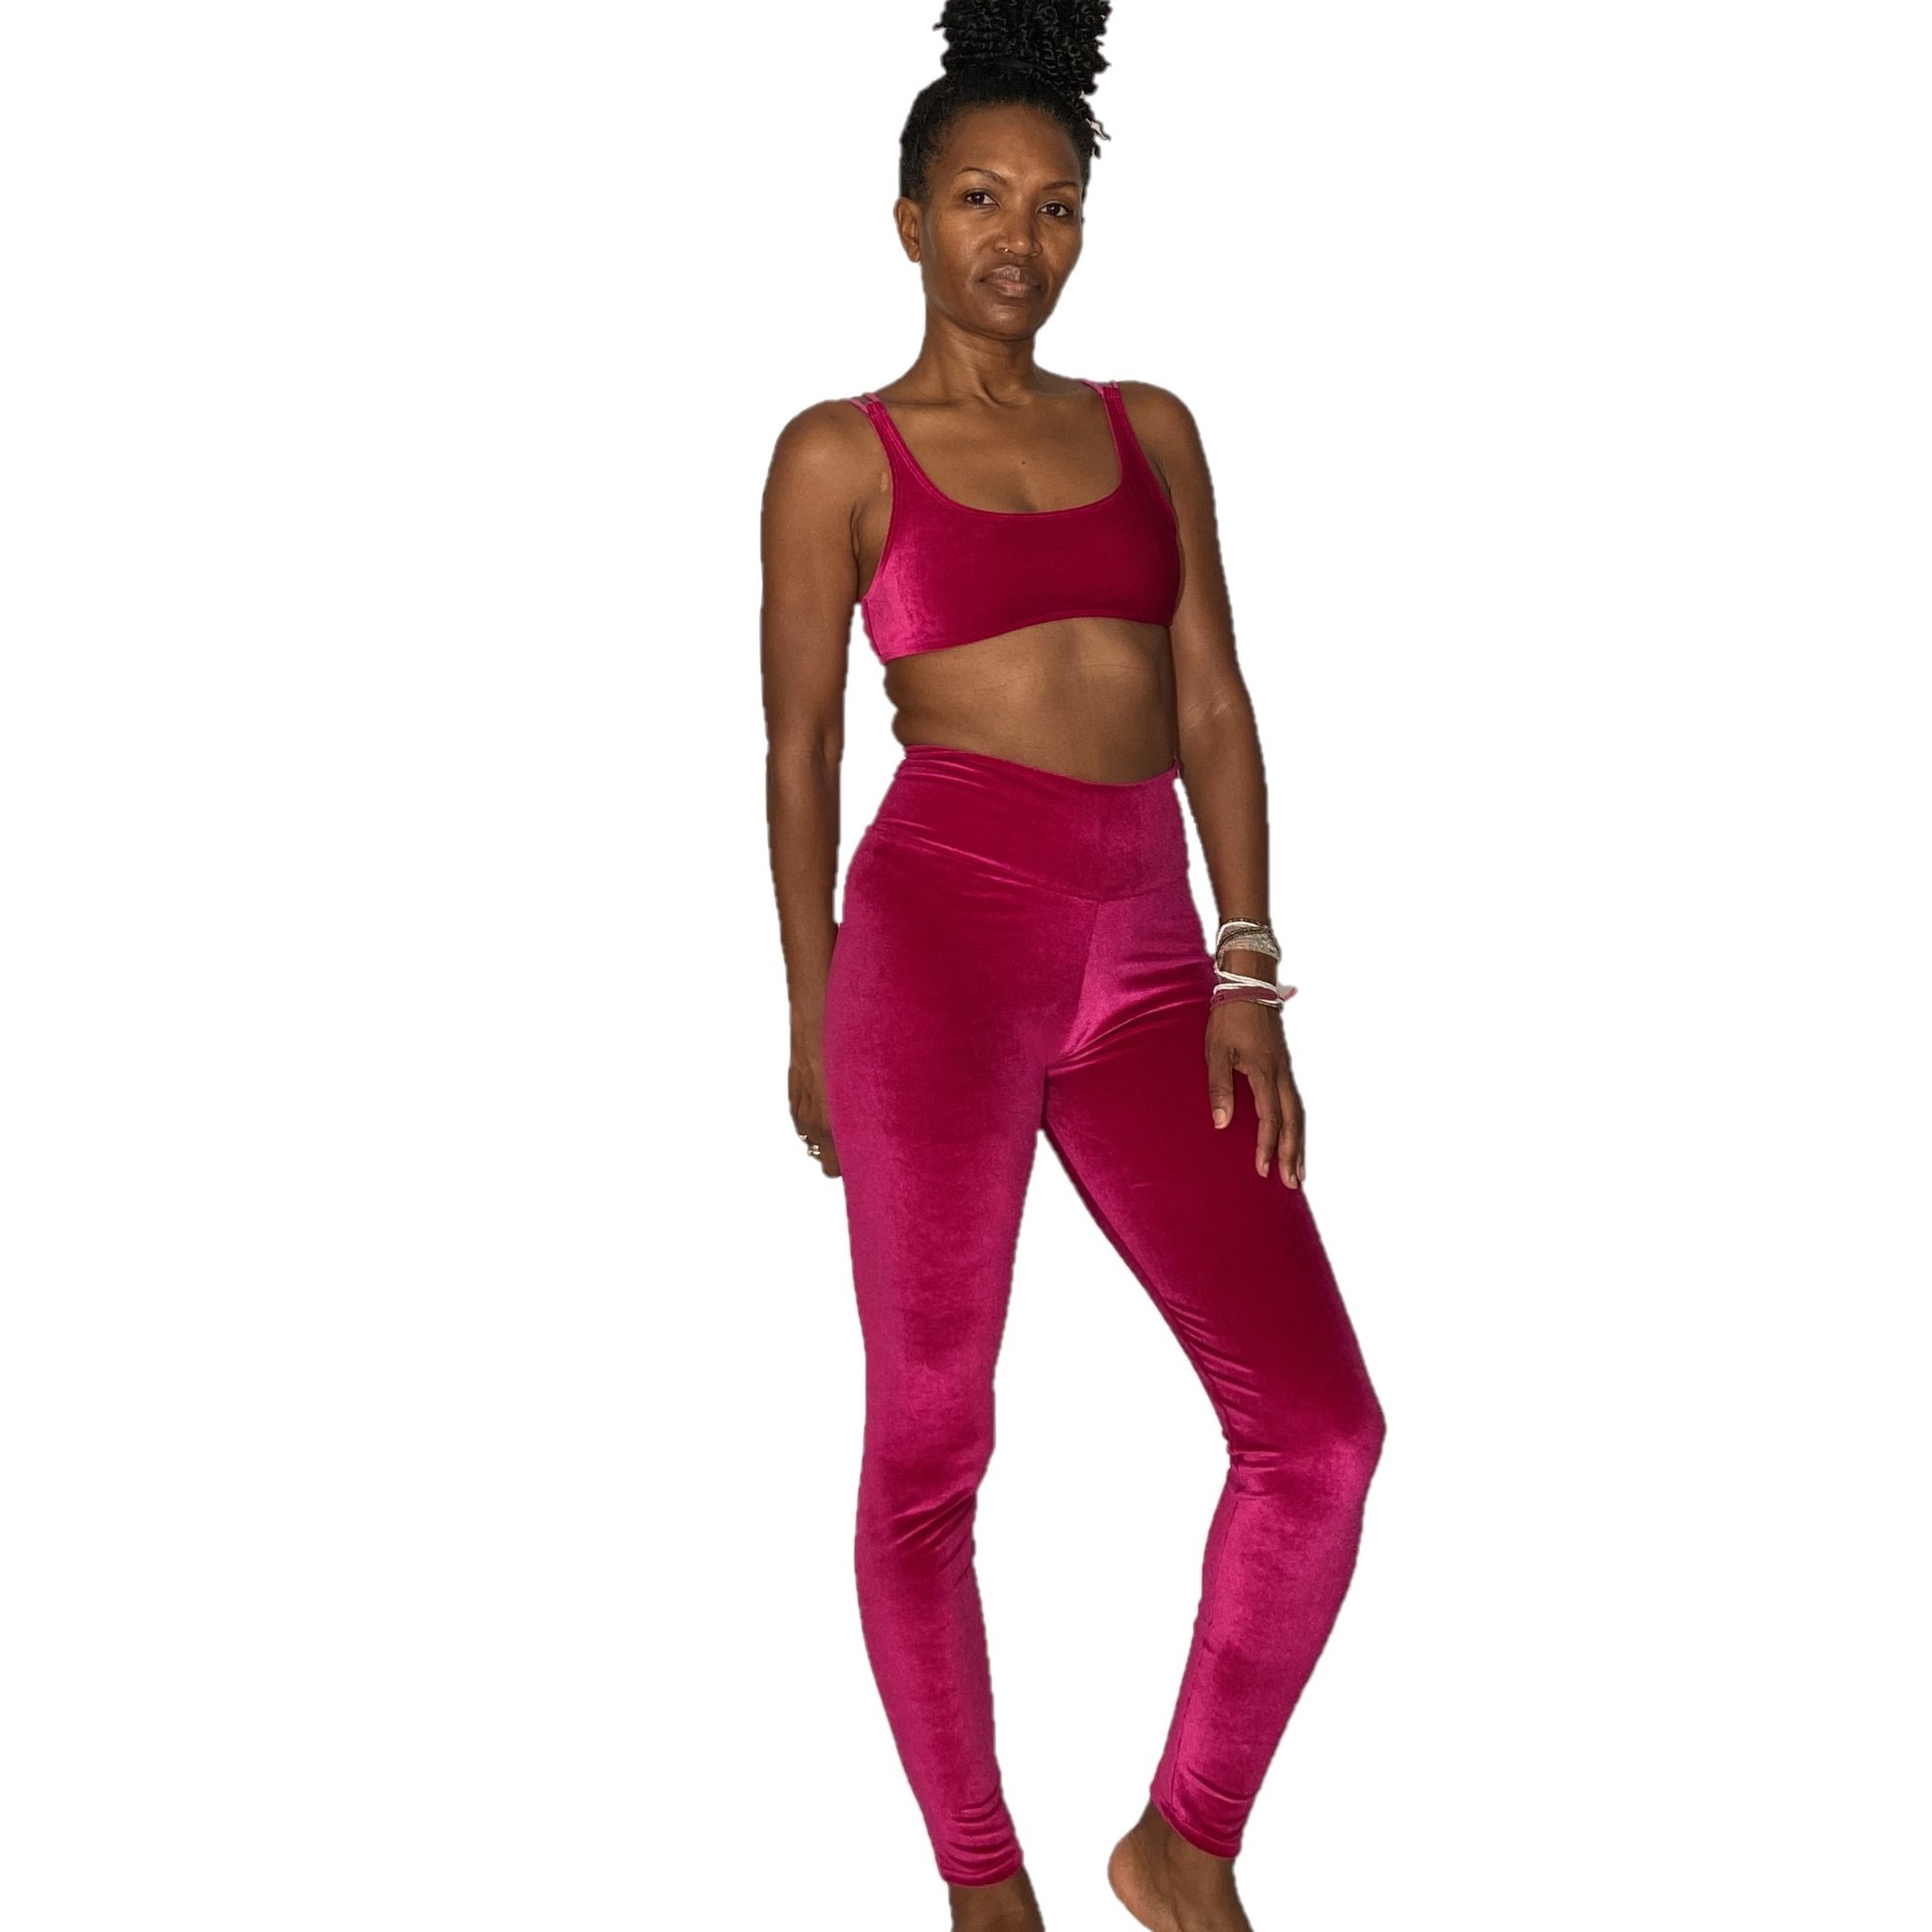 Brasini Fit High Waisted Leggings for Comfortable and Stylish Workouts